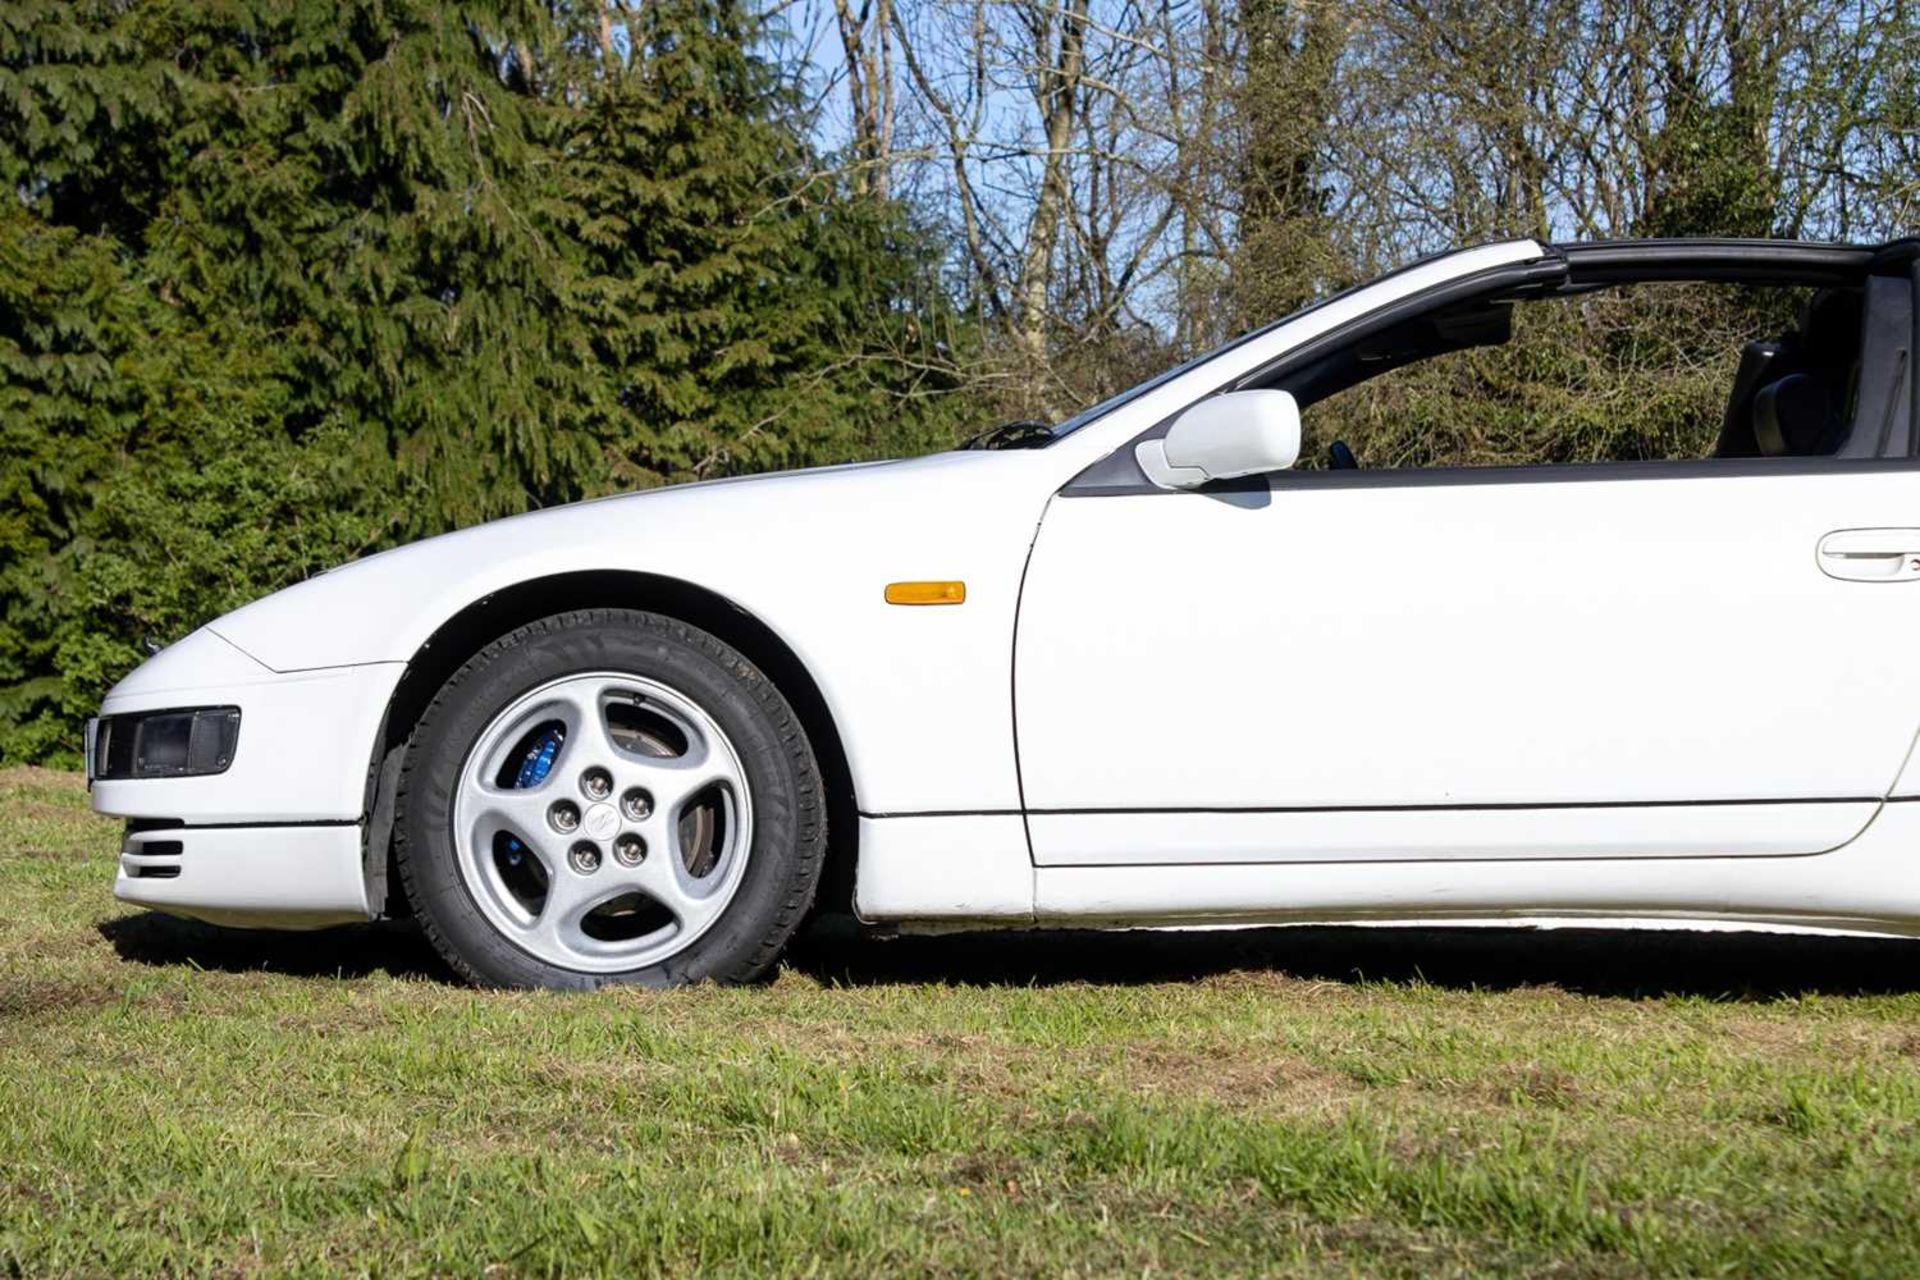 1990 Nissan 300ZX Turbo 2+2 Targa One of the last examples registered in the UK - Image 29 of 89